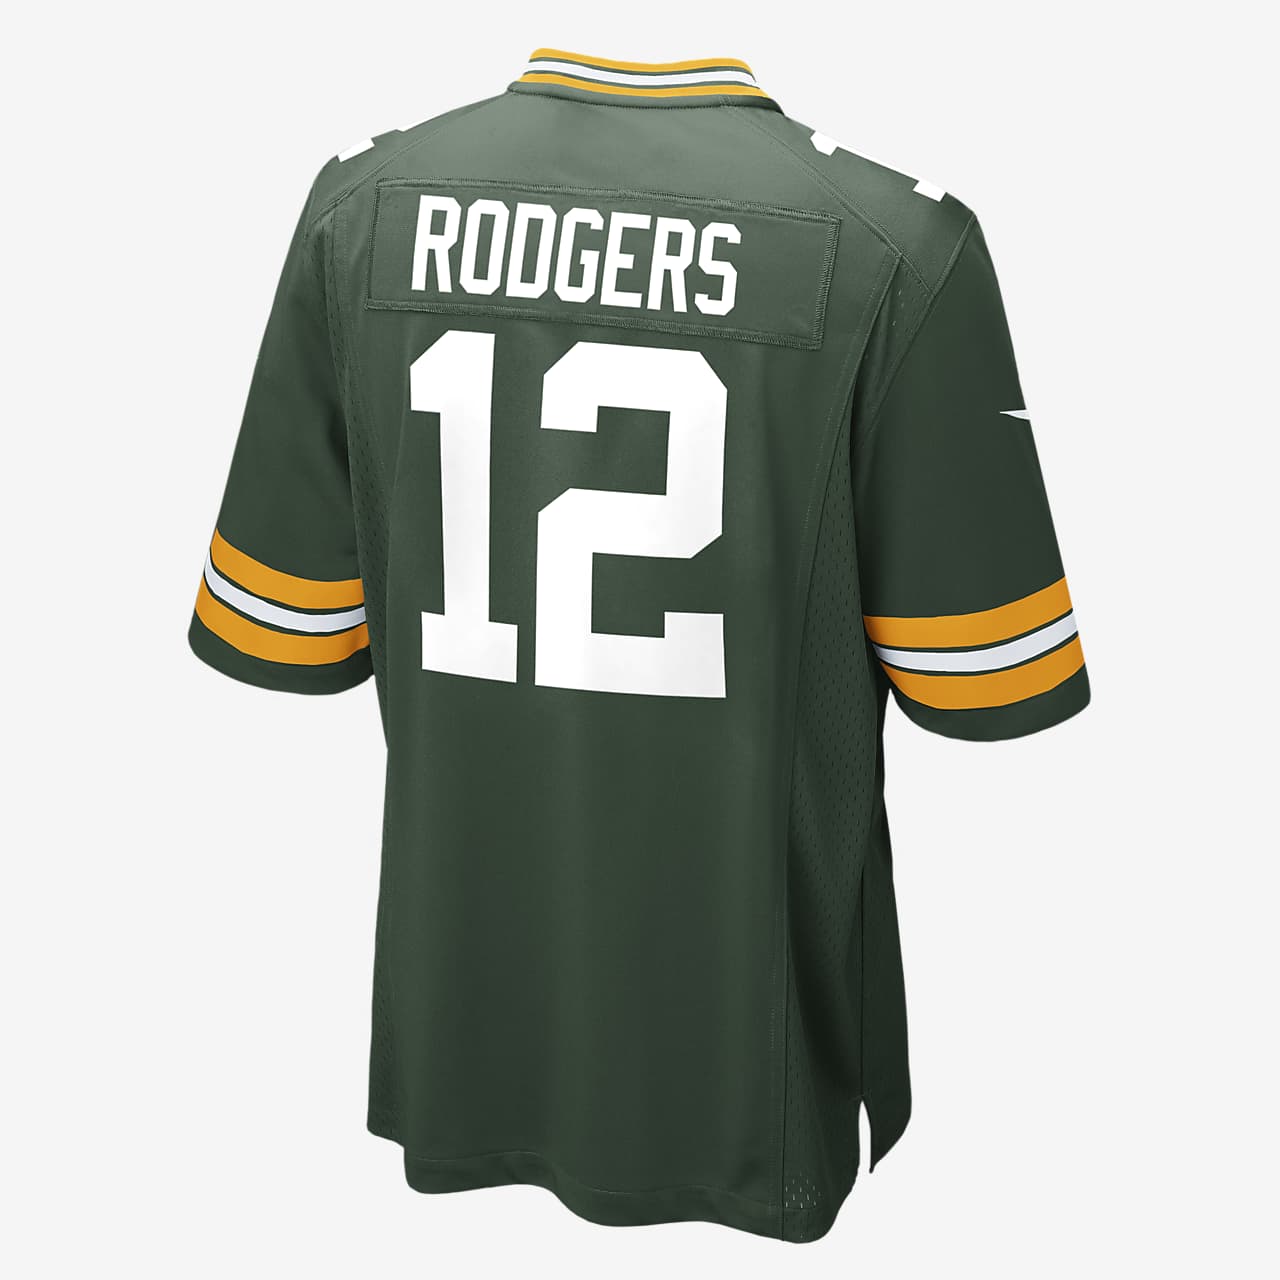 NFL Green Bay Packers (Aaron Rodgers) Kids' Football Home Game Jersey